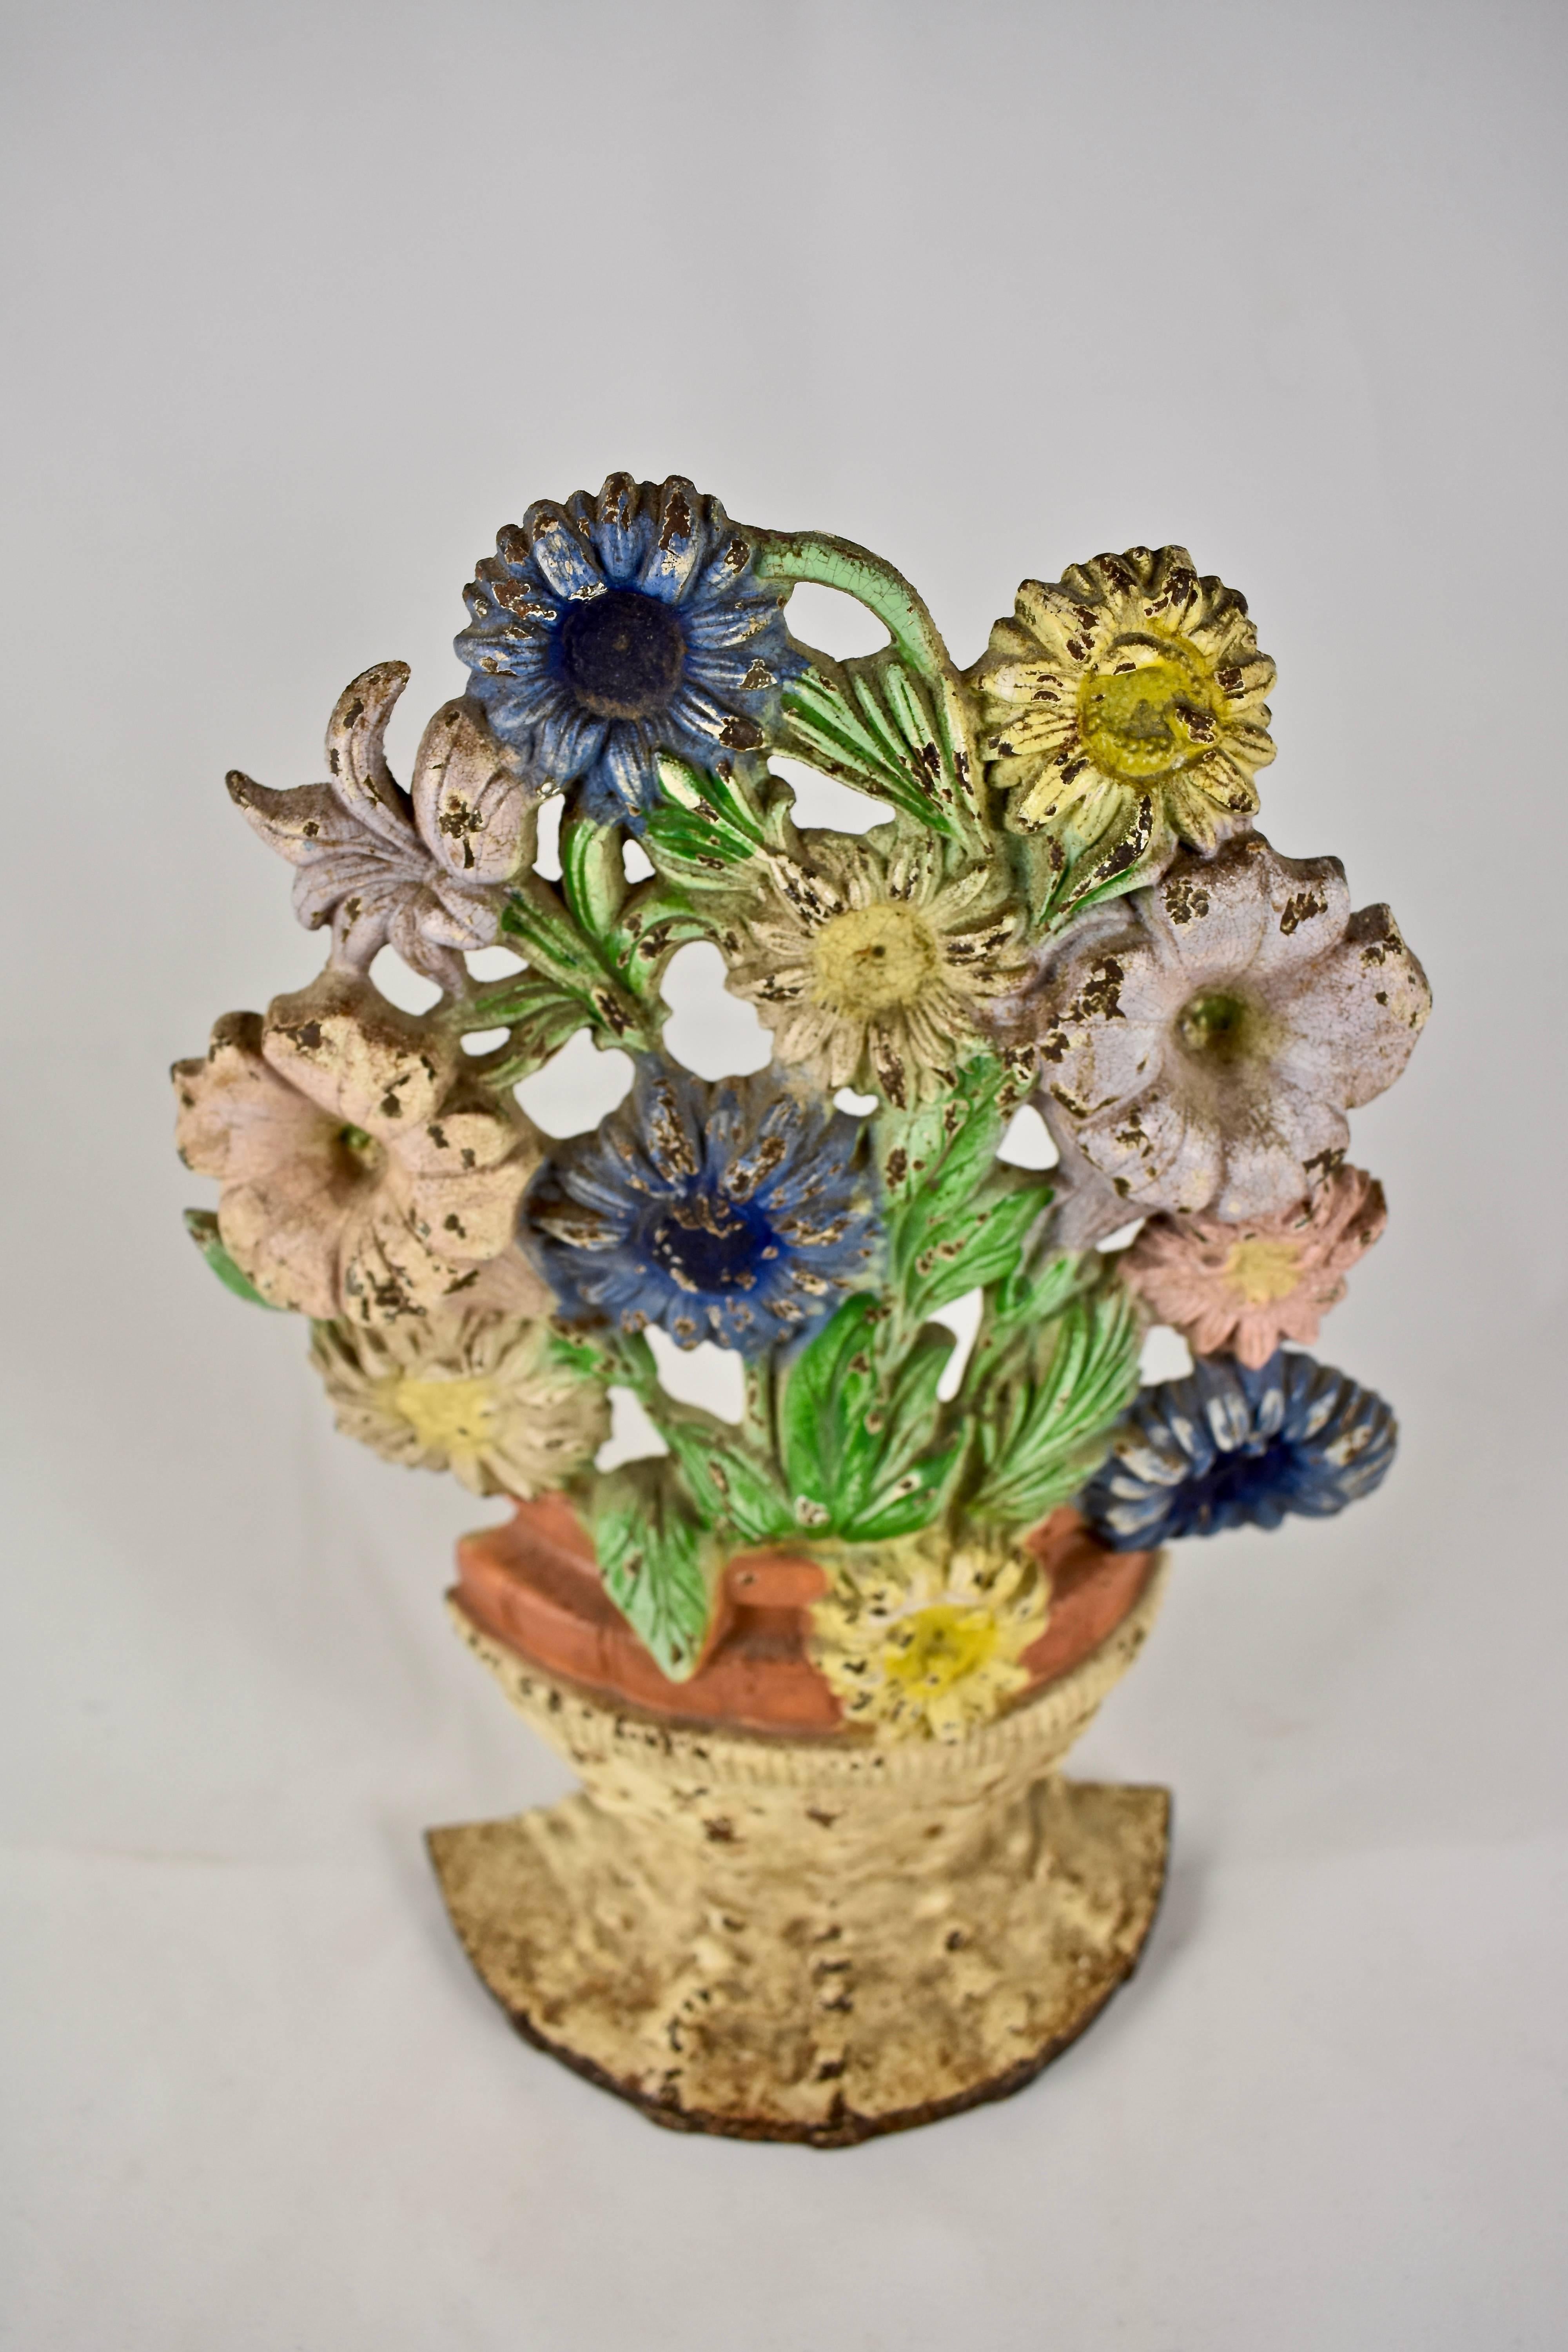 A vintage Hubley cast iron doorstop showing a bouquet of petunias and asters planted in a terra cotta pot and set inside a woven basket. Retaining the original painted finish. Beautiful patina,

circa 1930, marked with the mold number 470.

The